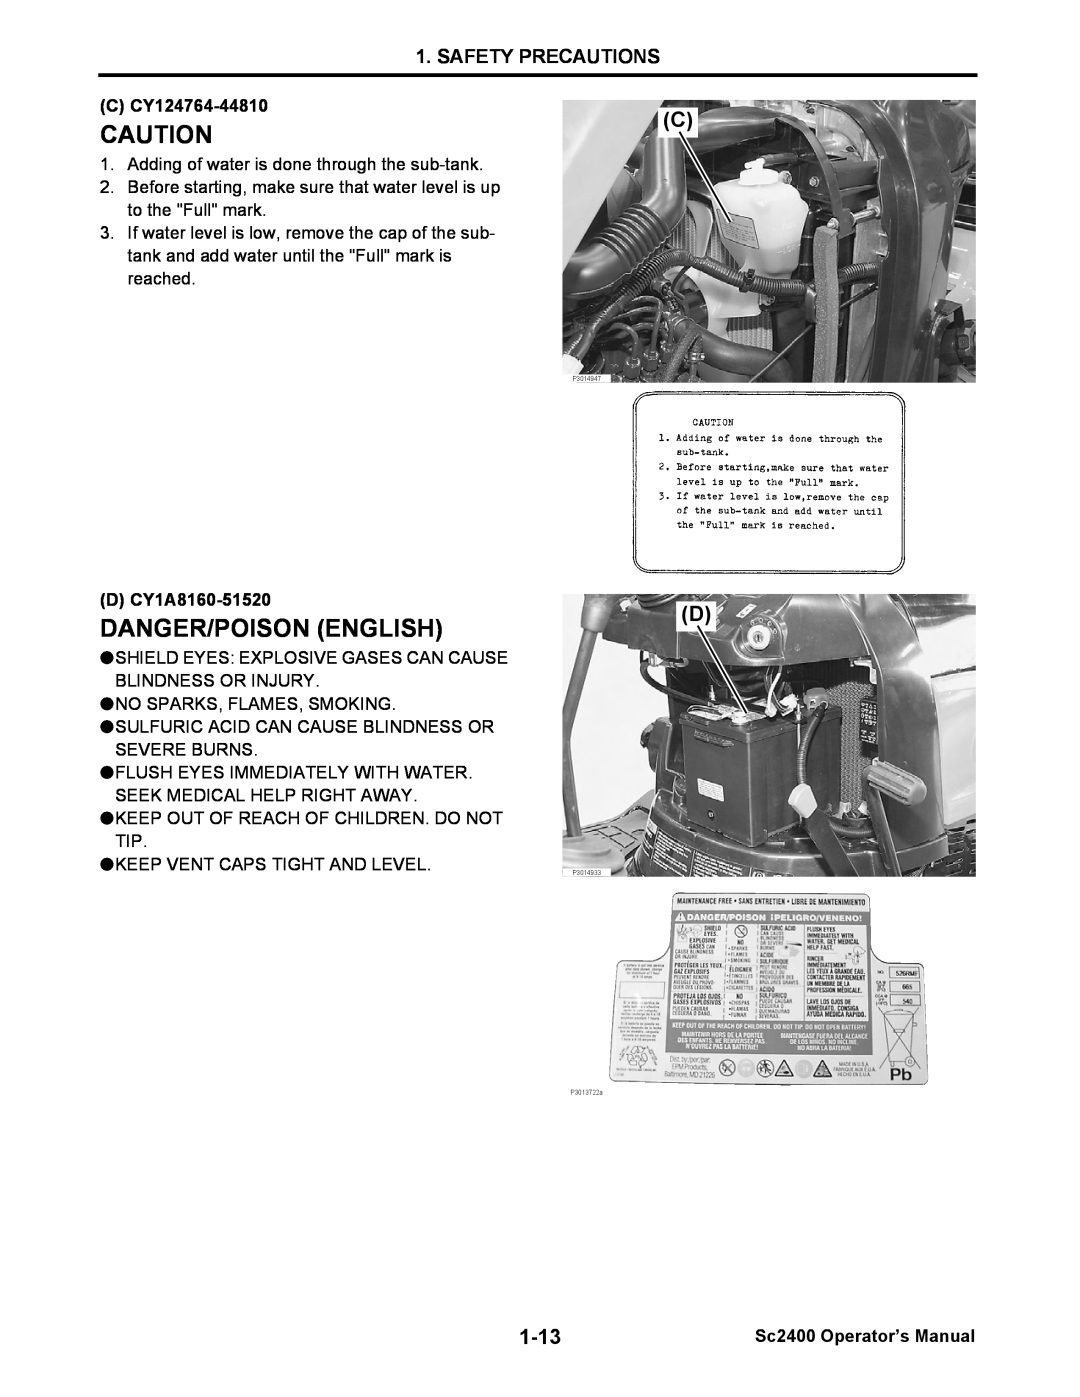 Cub Cadet SC2400 Danger/Poison English, Safety Precautions, C CY124764-44810, D CY1A8160-51520, Sc2400 Operator’s Manual 